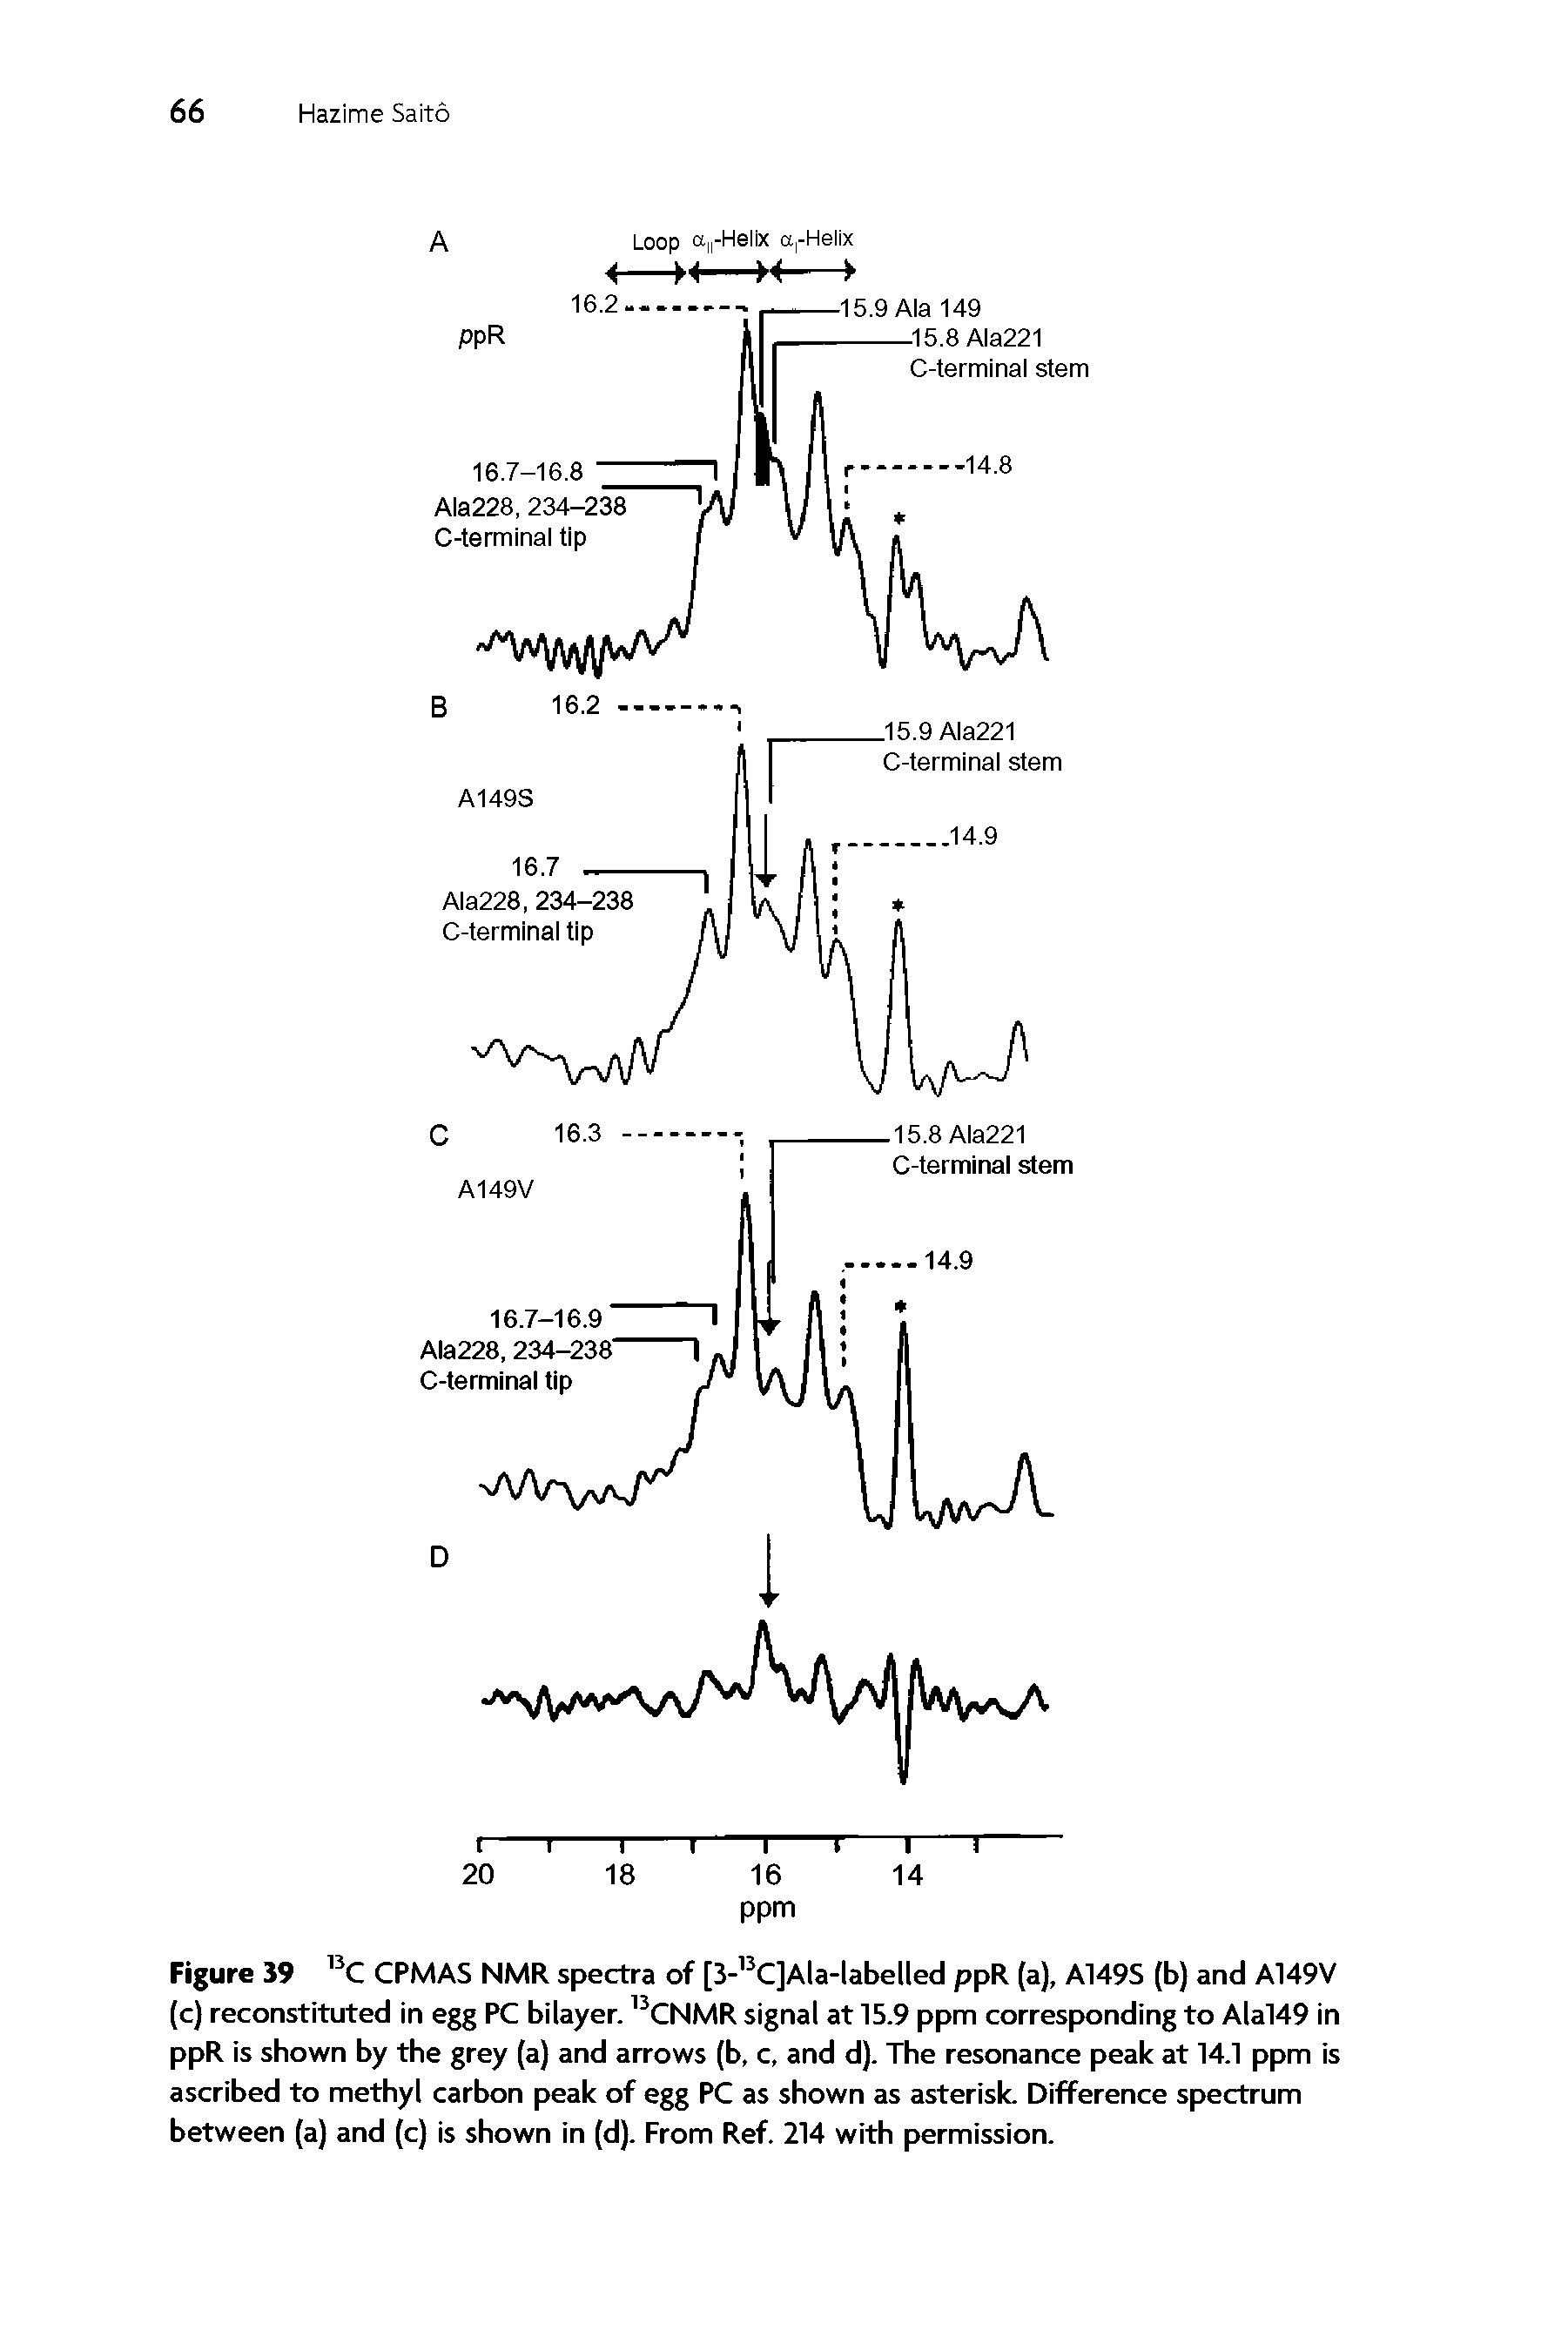 Figure 39 BC CPMAS NMR spectra of [3- 3C]Ala-labelled ppR (a), A149S (b) and A149V (c) reconstituted in egg PC bilayer. 13CNMR signal at 15.9 ppm corresponding to Alal49 in ppR is shown by the grey (a) and arrows (b, c, and d). The resonance peak at 14.1 ppm is ascribed to methyl carbon peak of egg PC as shown as asterisk. Difference spectrum between (a) and (c) is shown in (d). From Ref. 214 with permission.